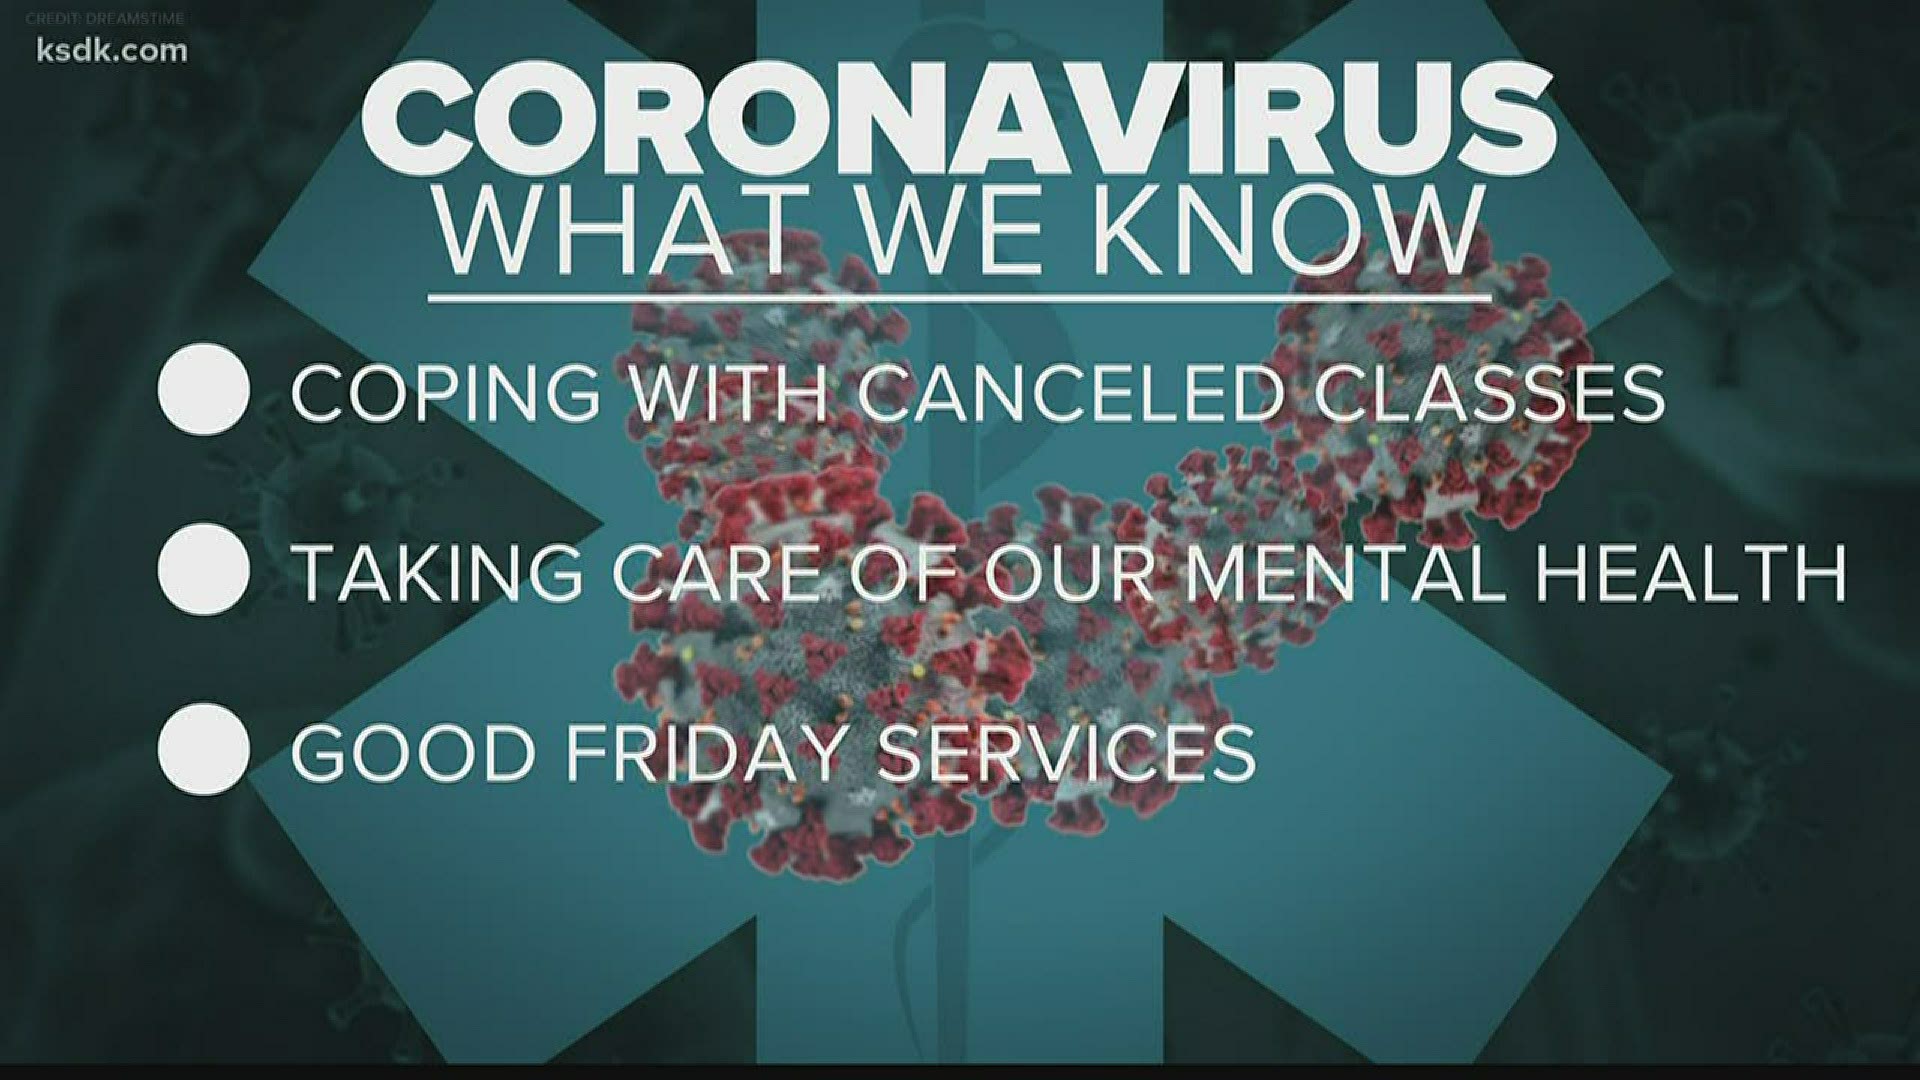 Our 10 p.m. coronavirus update for Friday, April 10